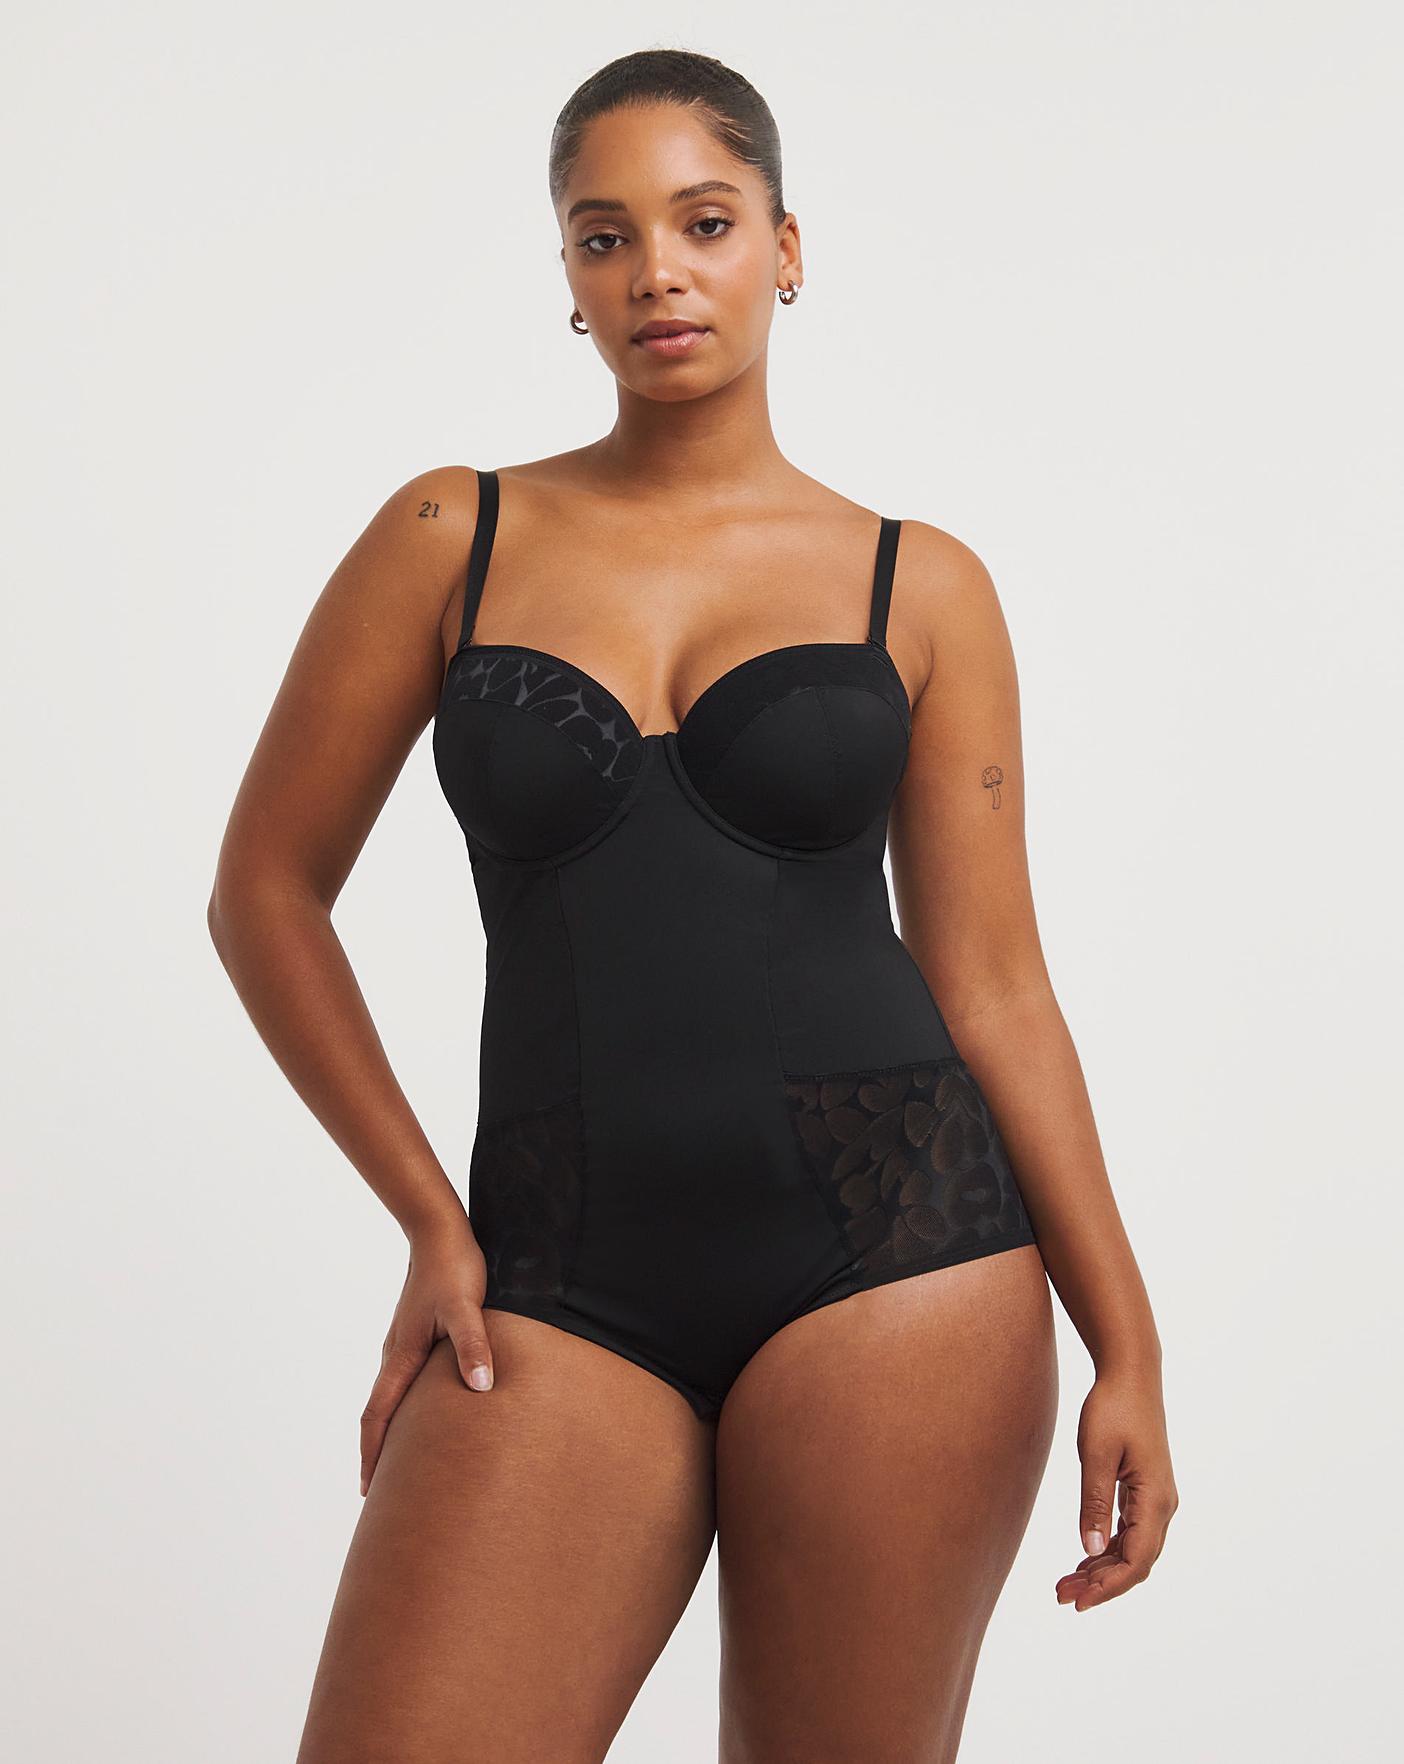 Women's Lace 'N Smooth Firm Control Bodysuit –